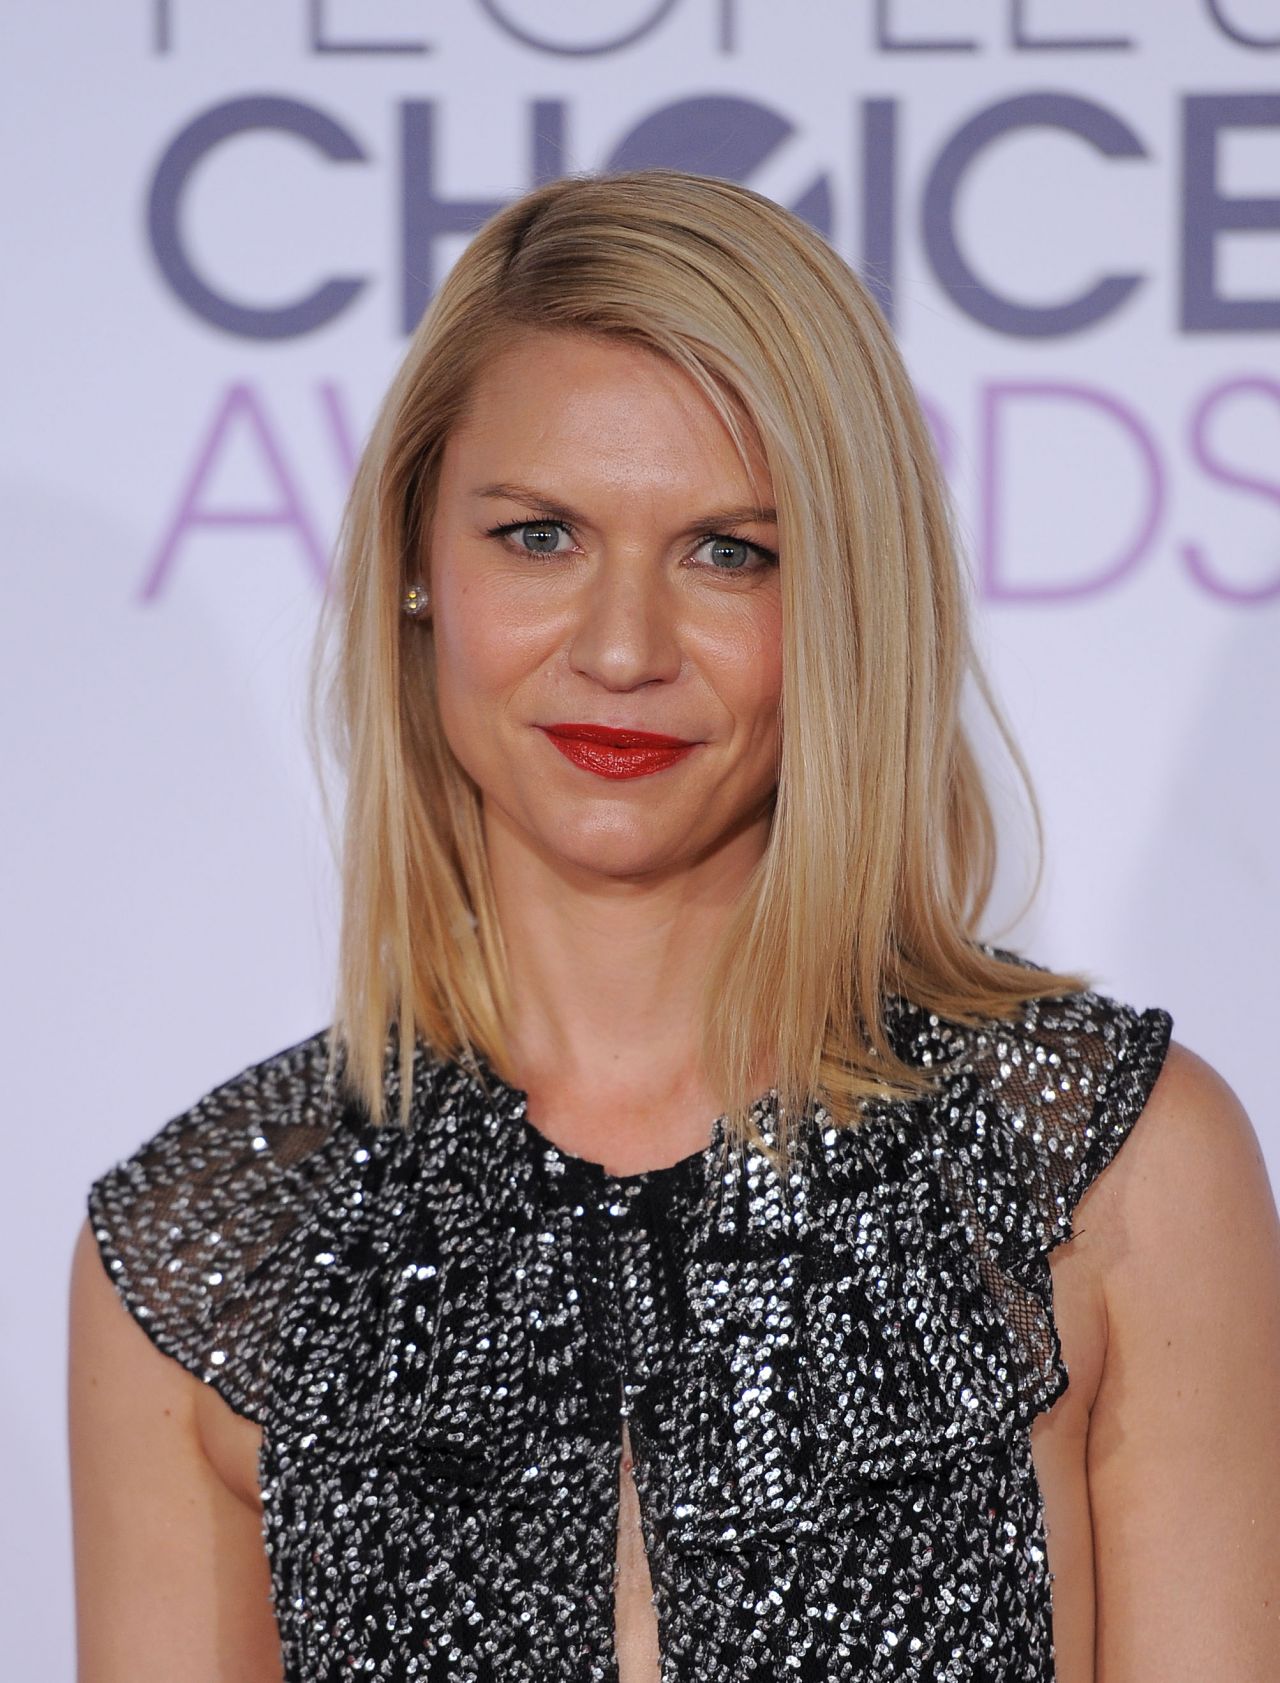 claire-danes-2016-people-s-choice-awards-in-microsoft-theater-in-los-angeles-4